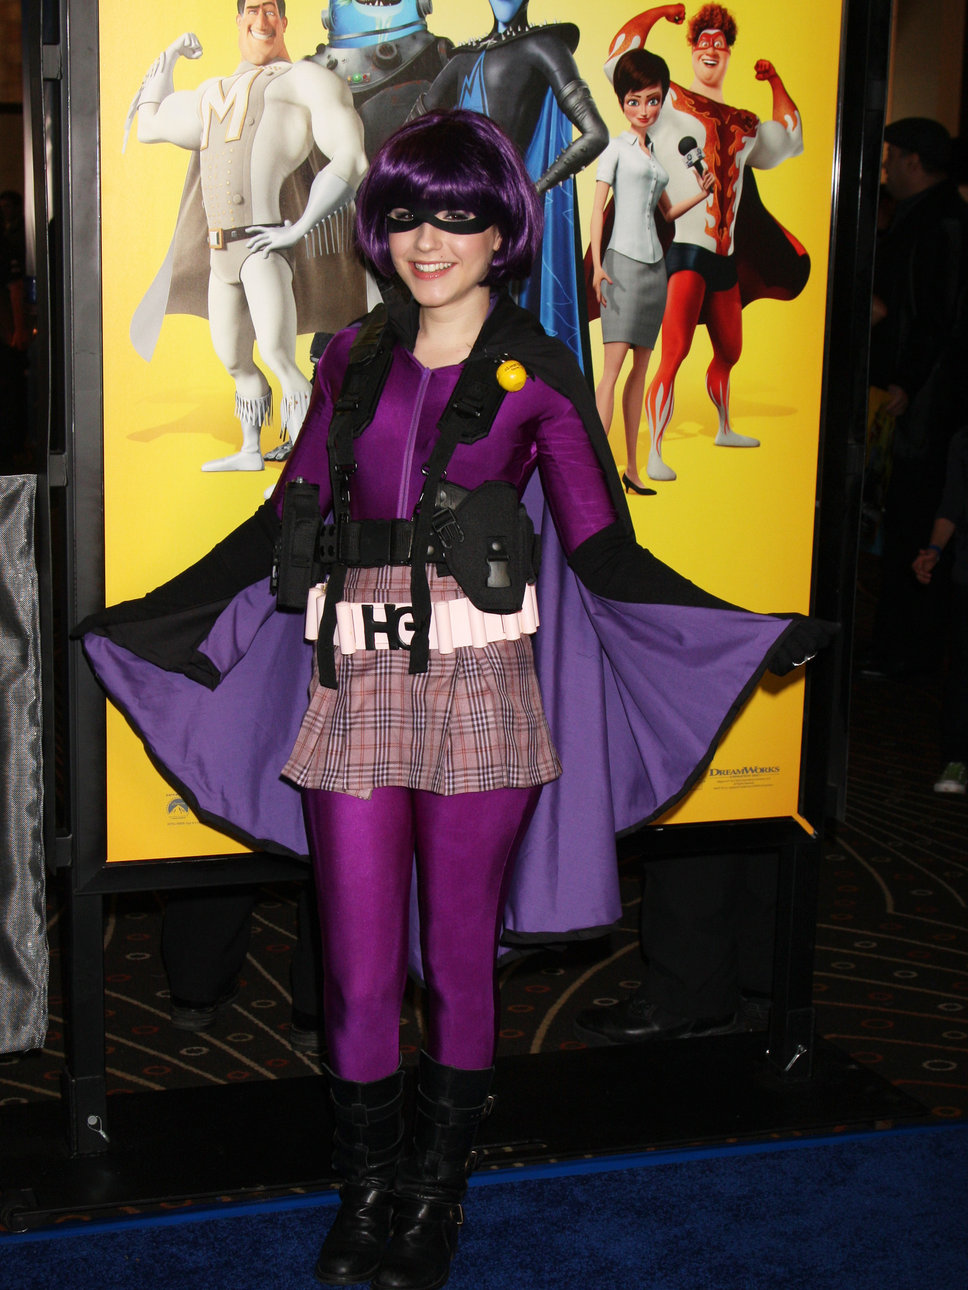 7. Nickelodeon cutie Erin Sanders dressed up as our favourite super hero of 2010, Hit Girl! We think she did a great job with her costume.